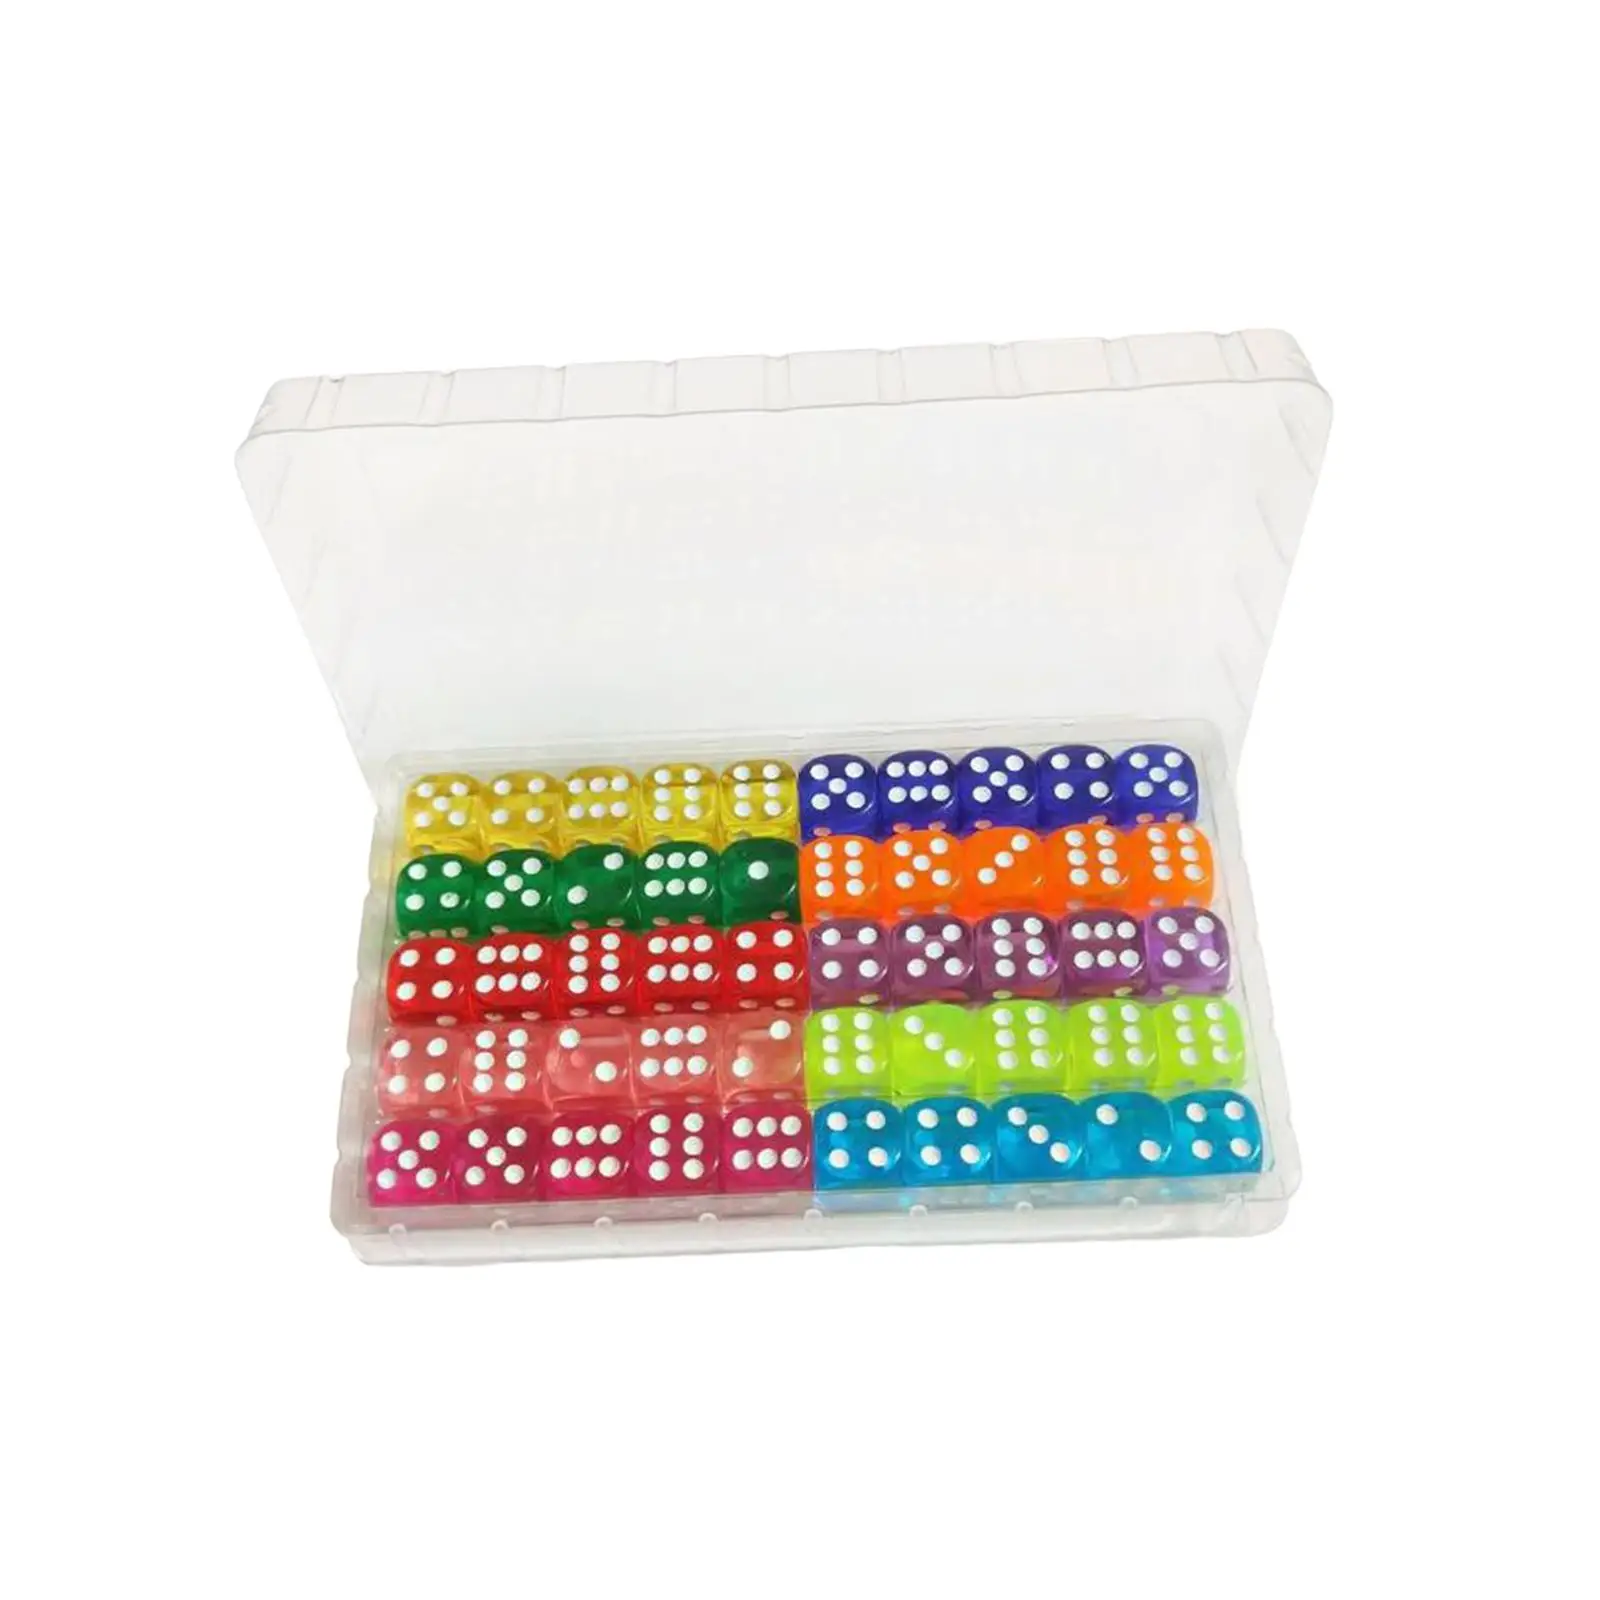 50Pcs Acrylic 6 Sided Dices Set, Six Sided Gaming Dice Math Counting Teaching Aids for KTV Card Games